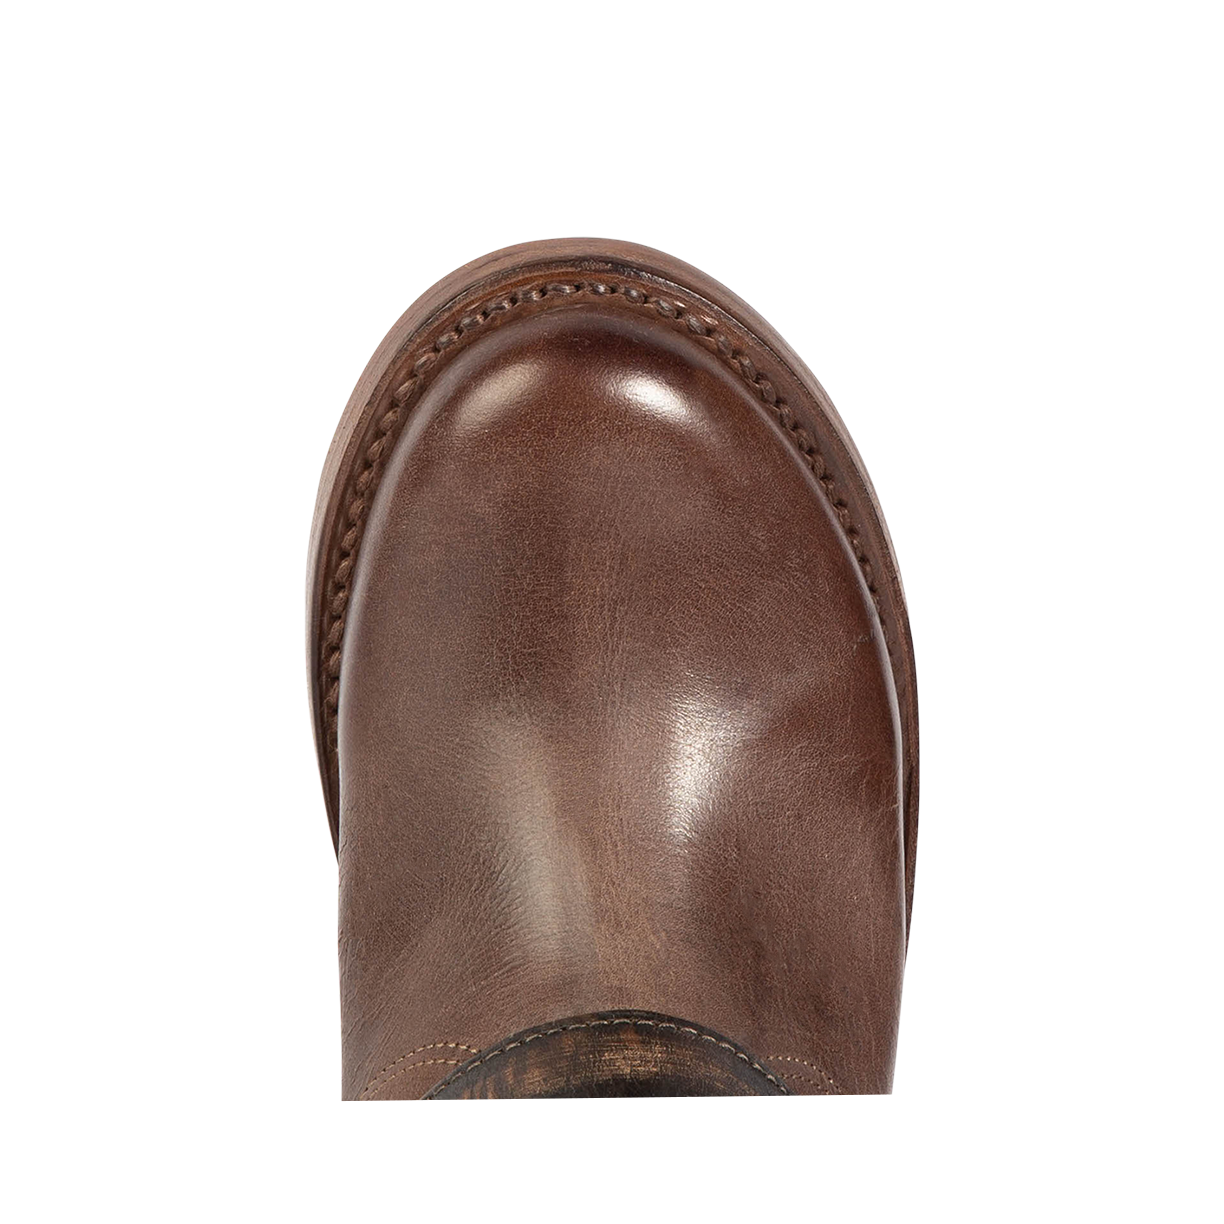 Top view showing round toe on FREEBIRD women's Crosby brown leather boot